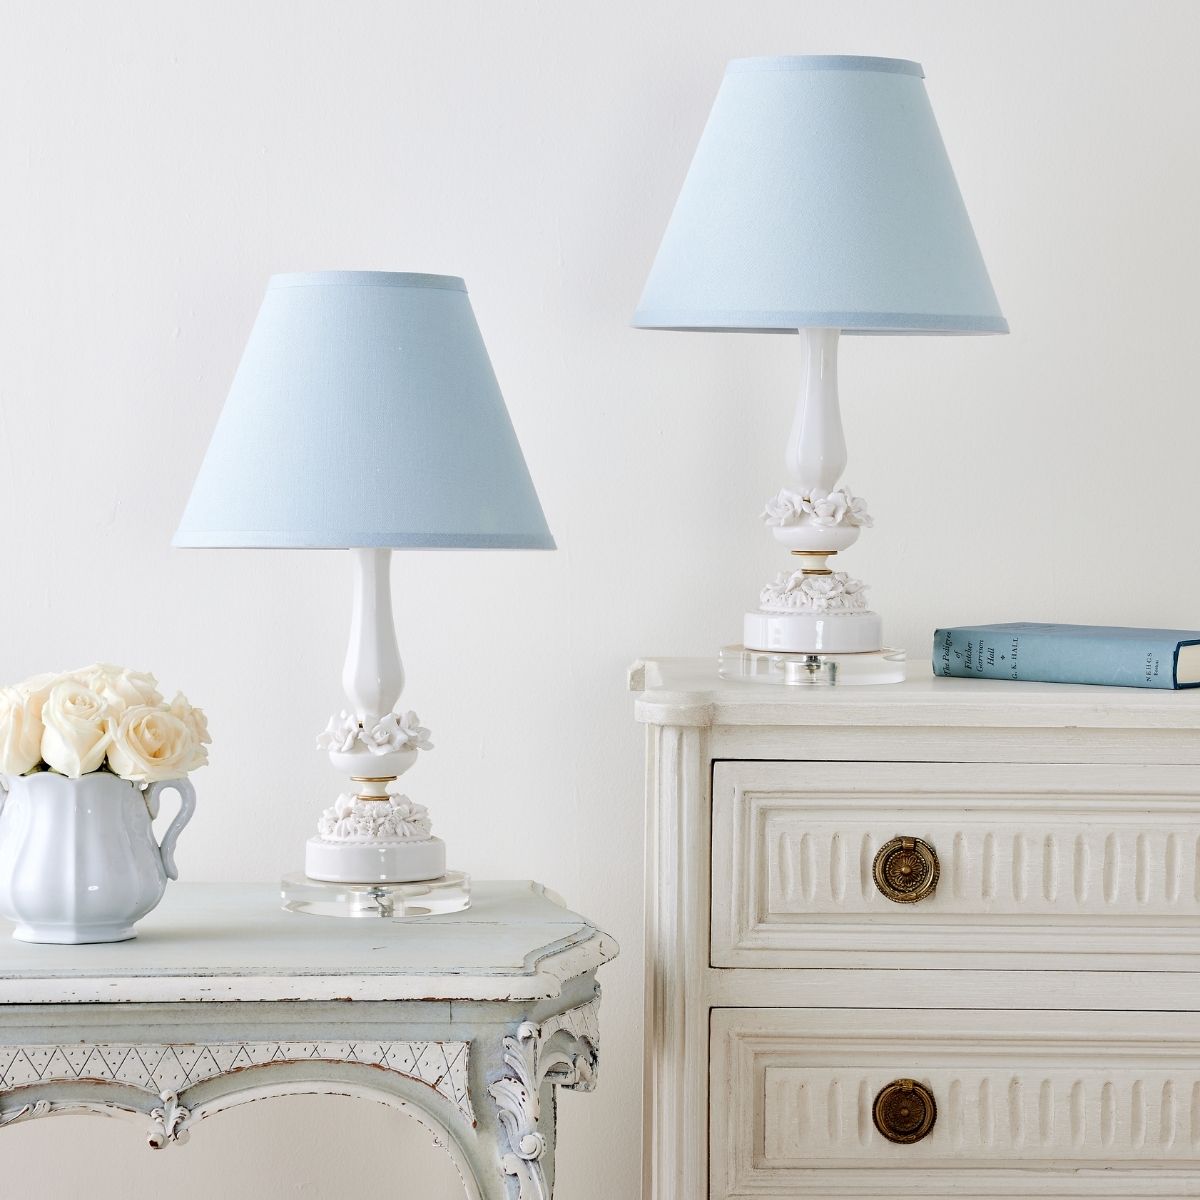 Pair of White Floral Lamp with Blue Taper Shade & Acrylic Base - Caitlin Wilson Design